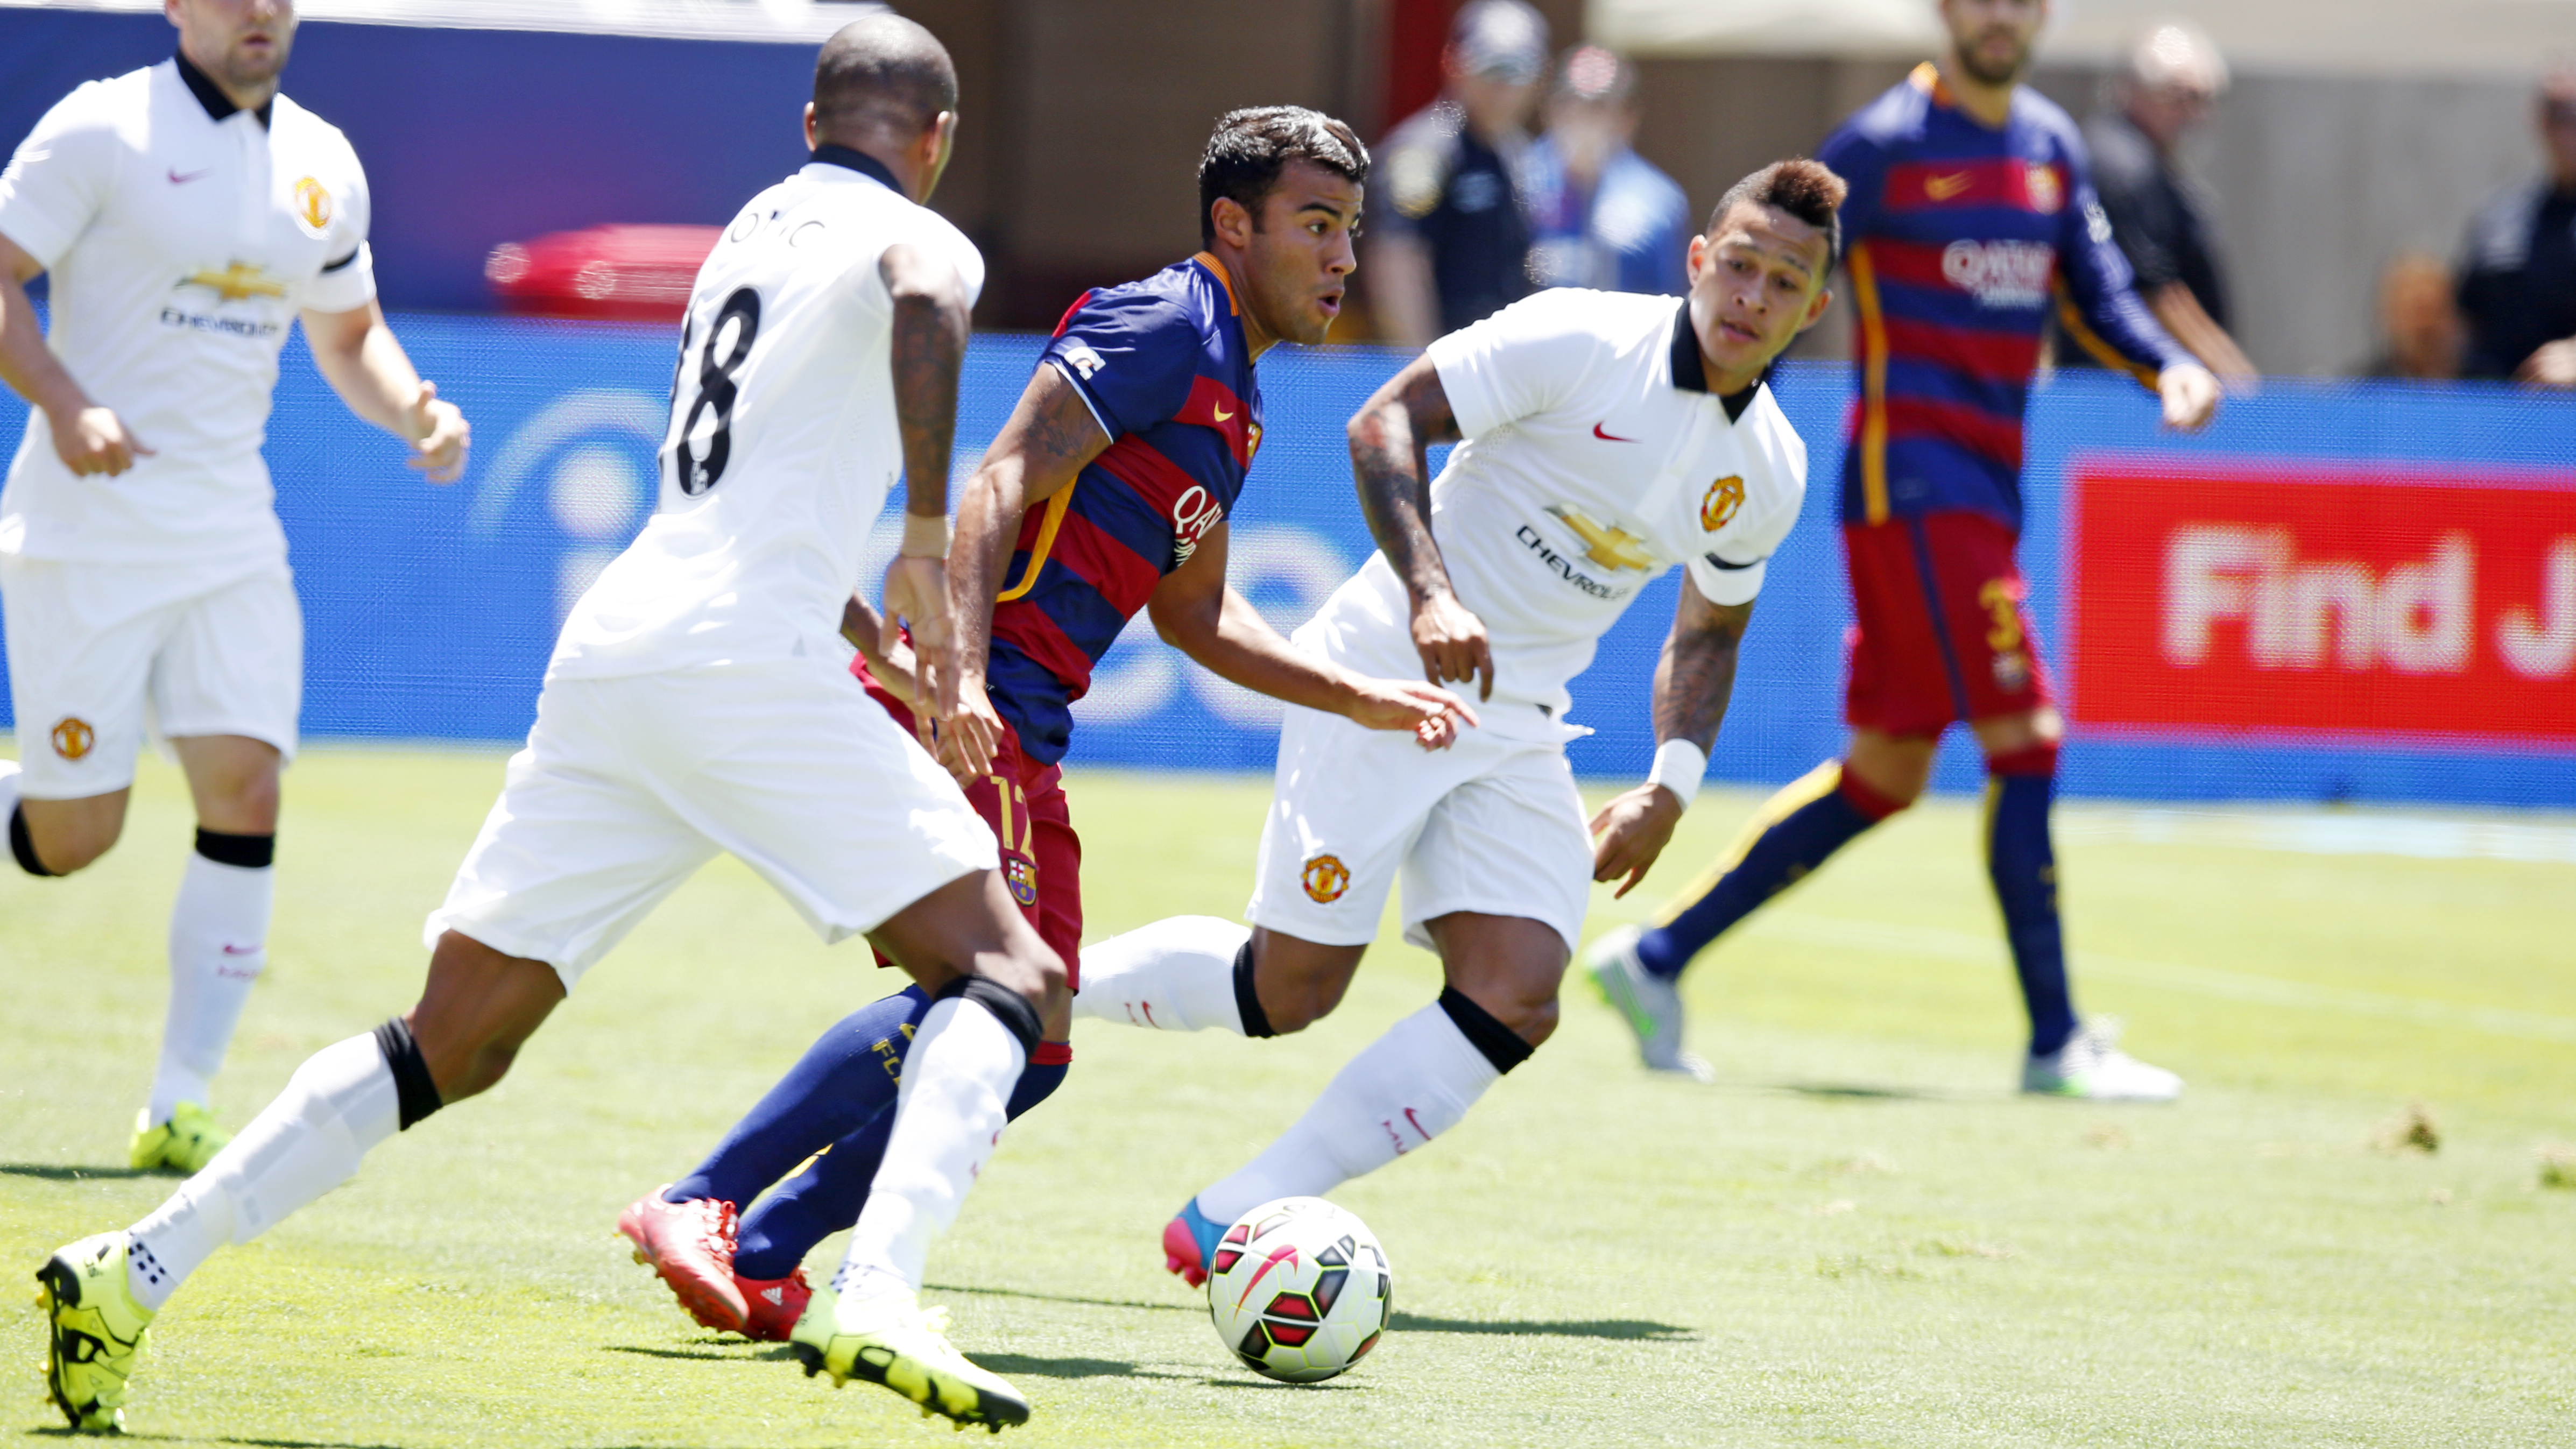 FC Barcelona v Manchester United: California dream ends with defeat (1–3)